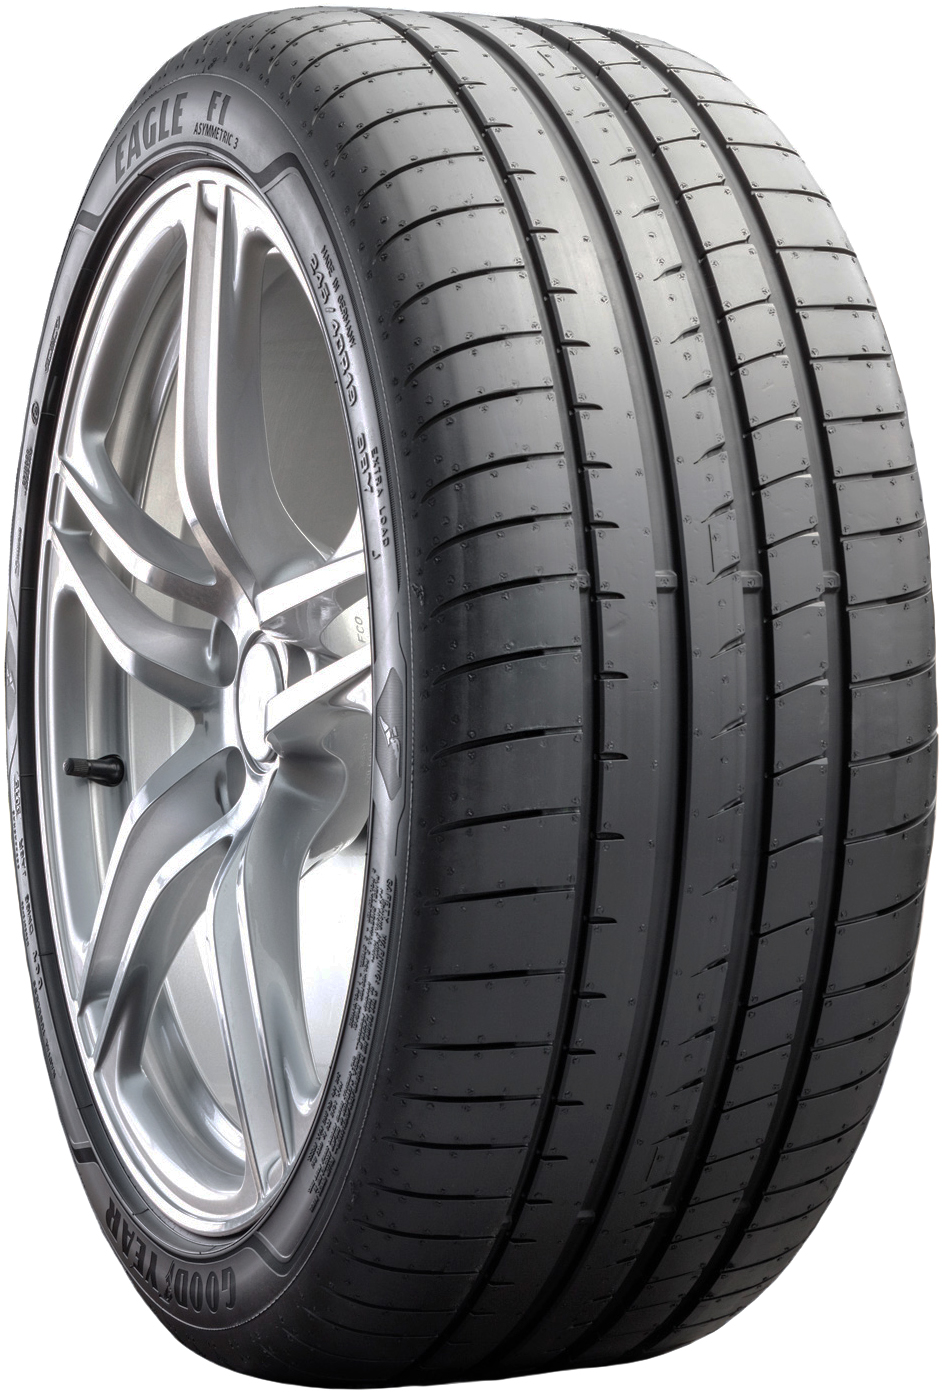 Anvelope auto GOODYEAR EAGF1AS3MX XL MERCEDES FP 275/40 R18 103Y